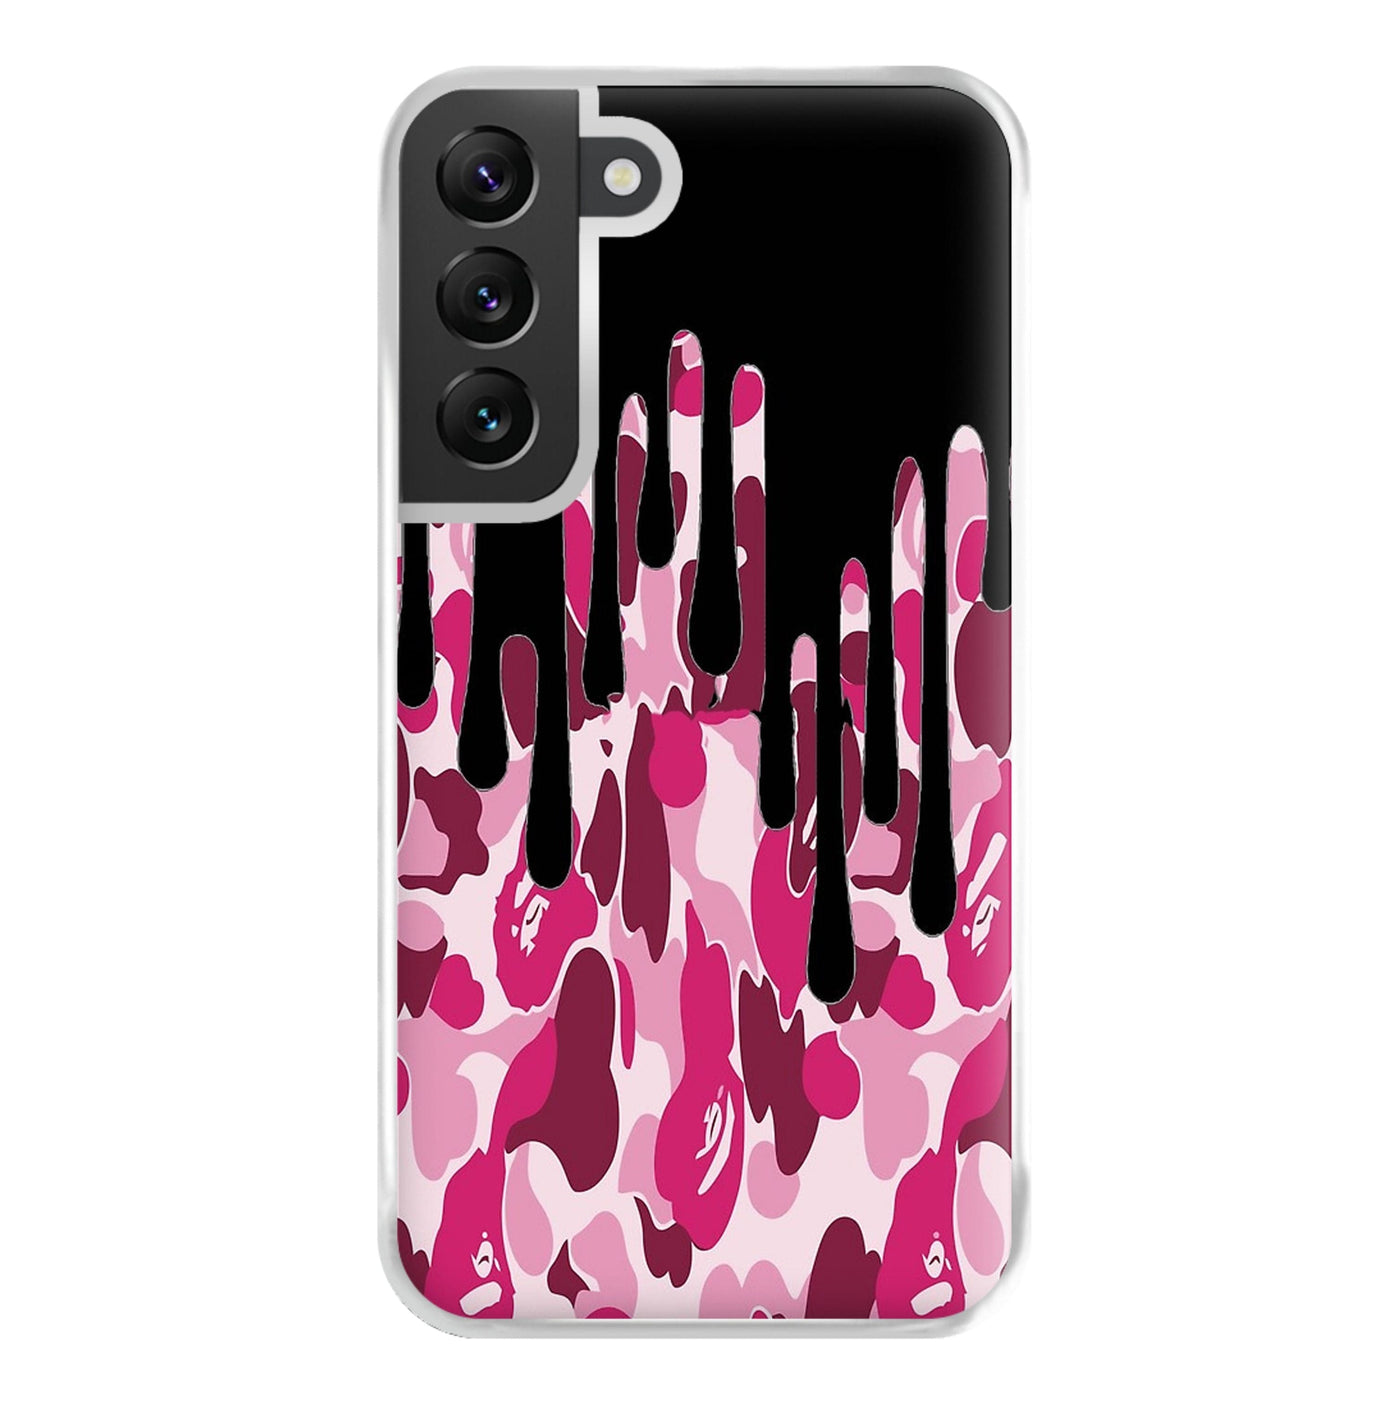 Kylie Jenner - Black & Pink Camo Dripping Cosmetics Phone Case